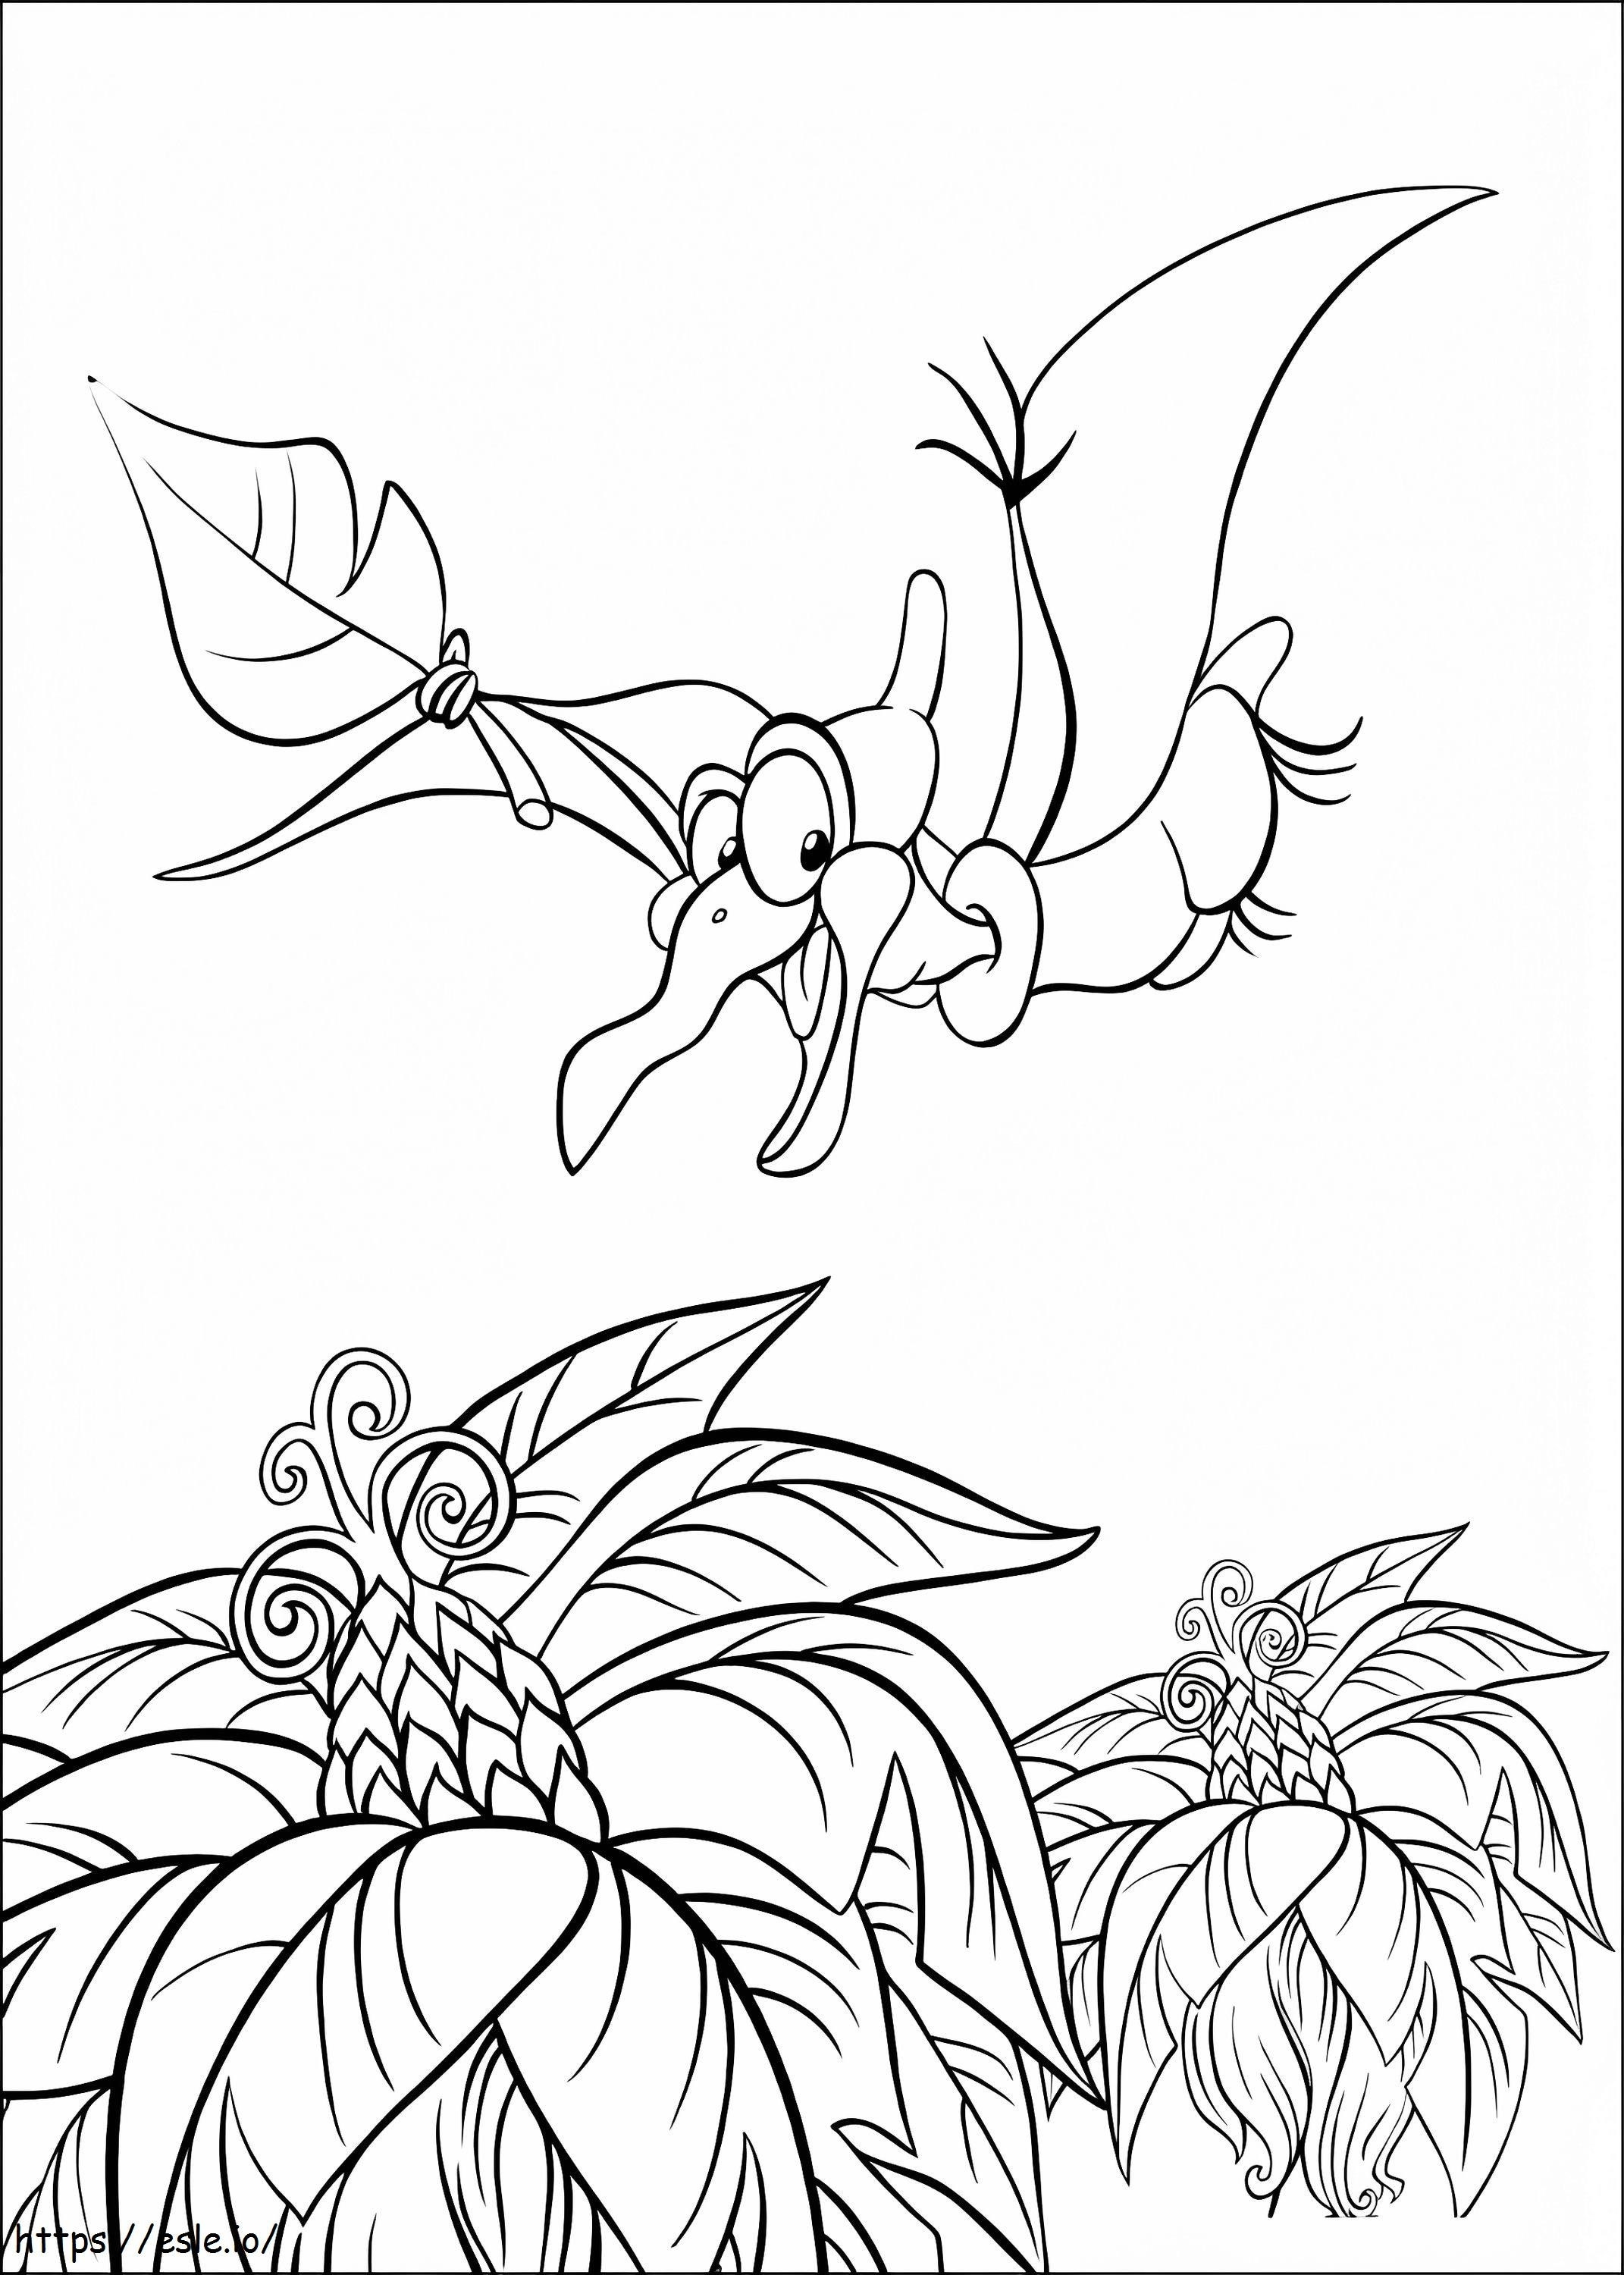 Petrie From The Land Before Time coloring page